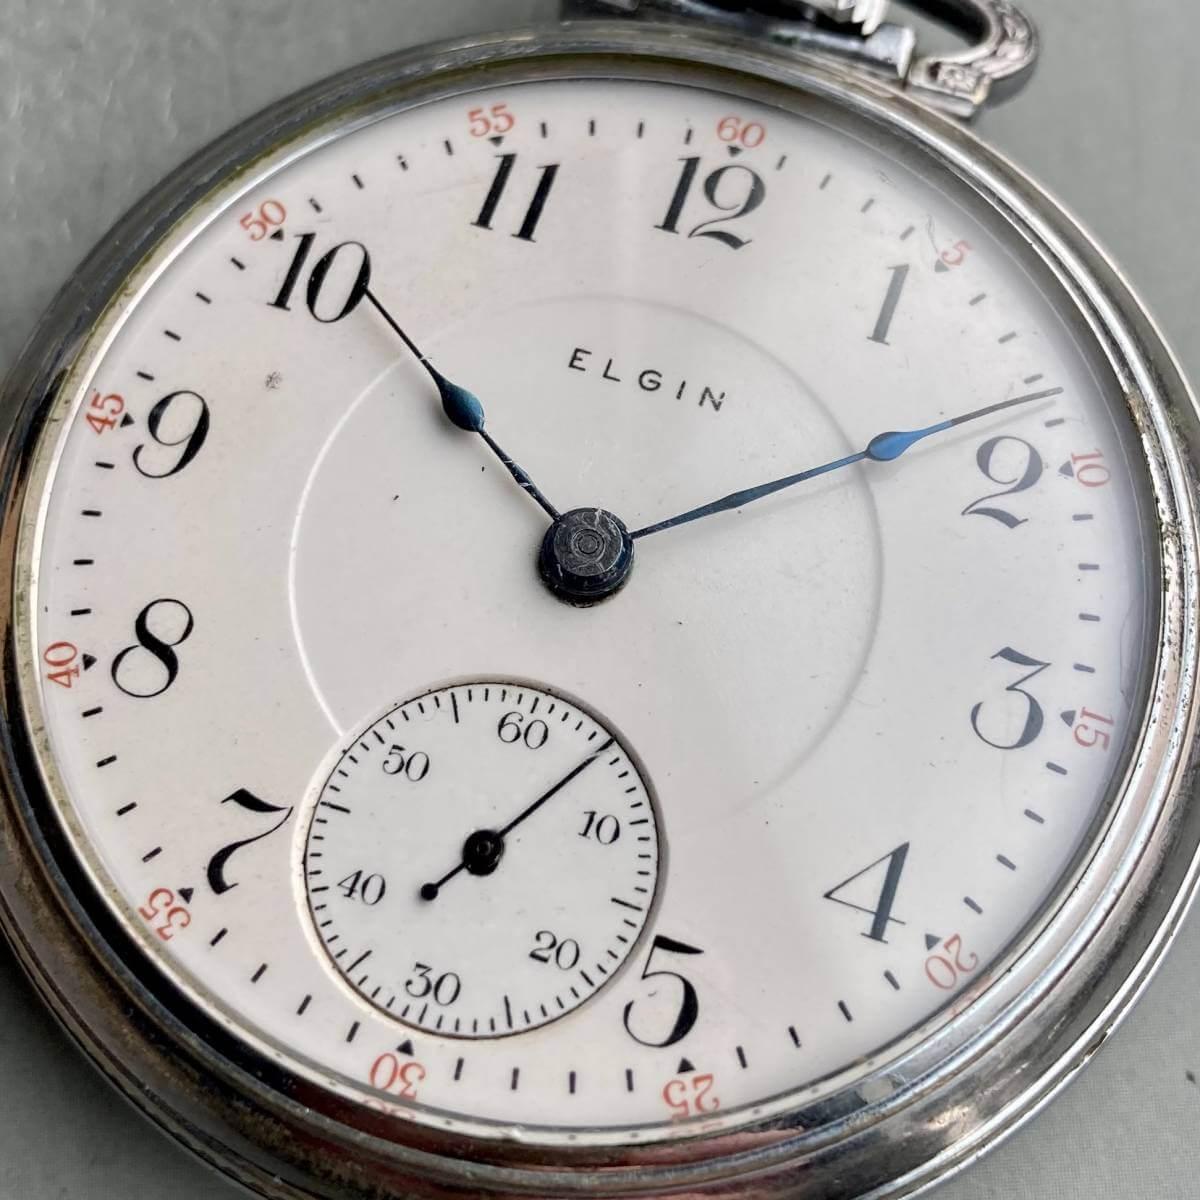 Elgin Pocket Watch 1950s Antique Manual 53mm Vintage - Murphy Johnson Watches Co.